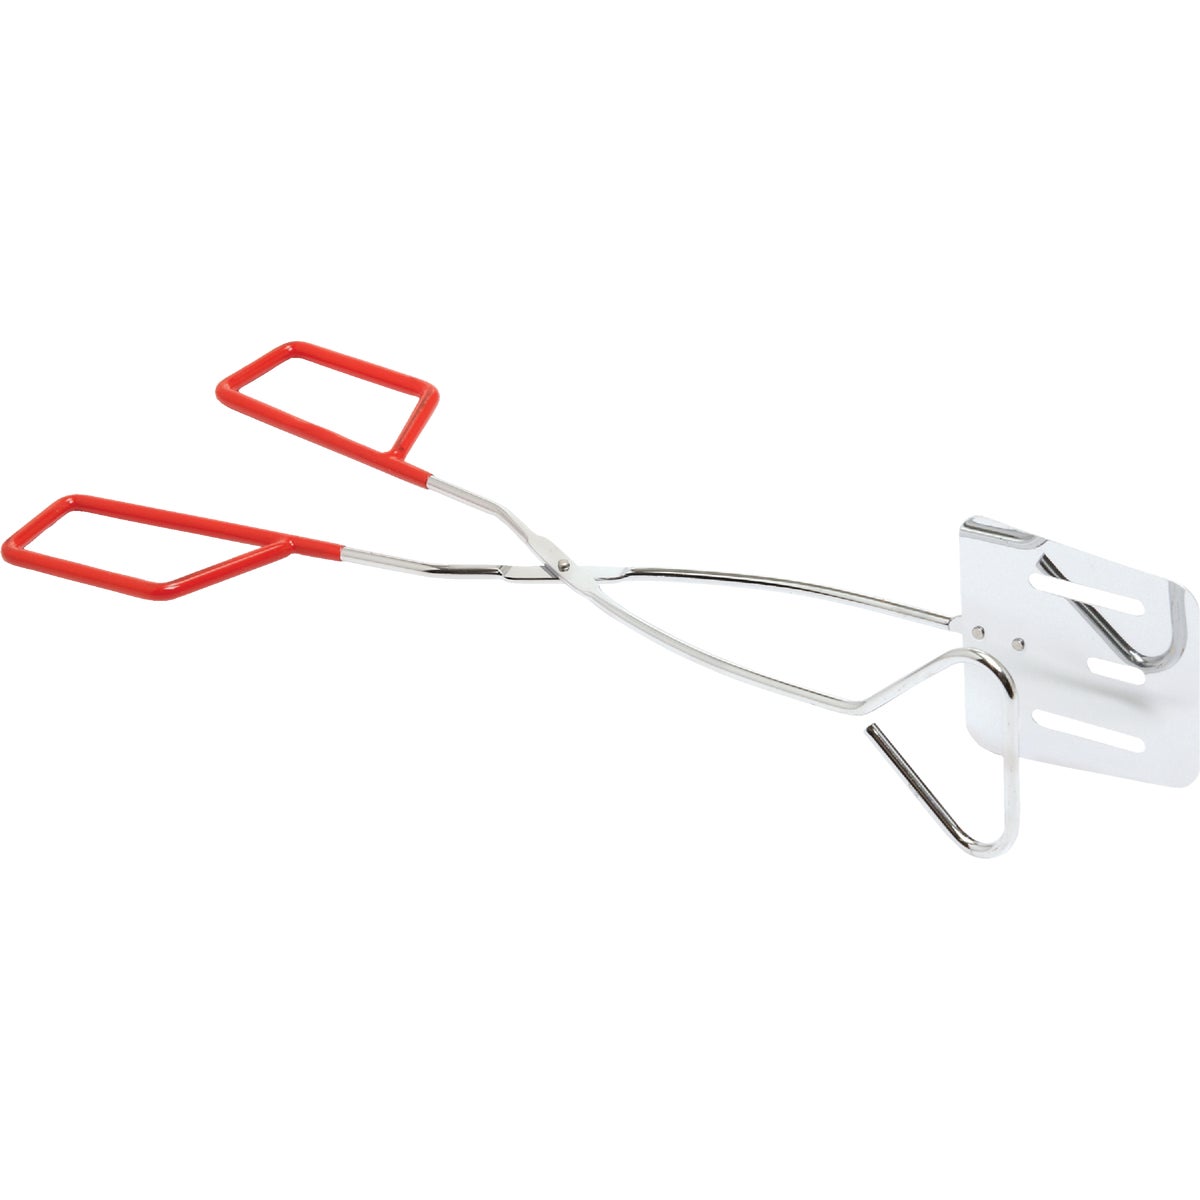 Item 808288, 2-in-1 spatula-fork barbeque tongs.